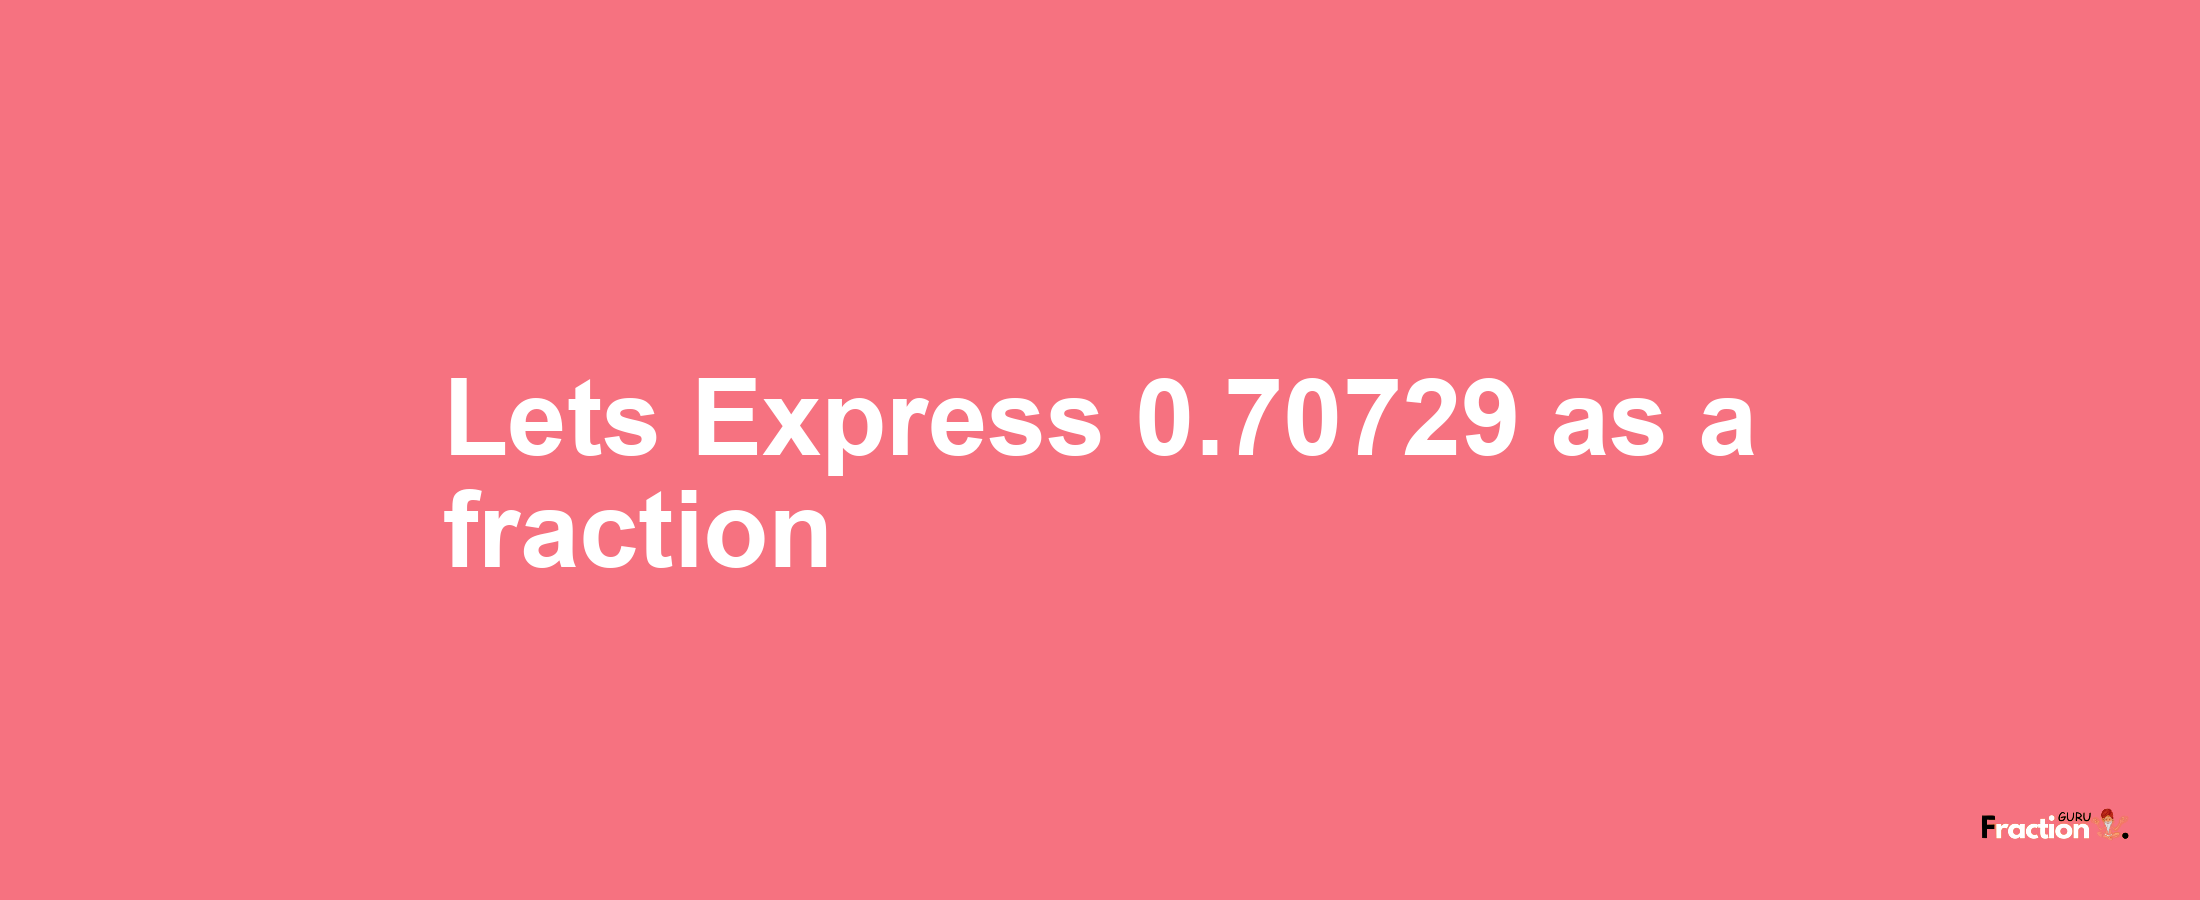 Lets Express 0.70729 as afraction